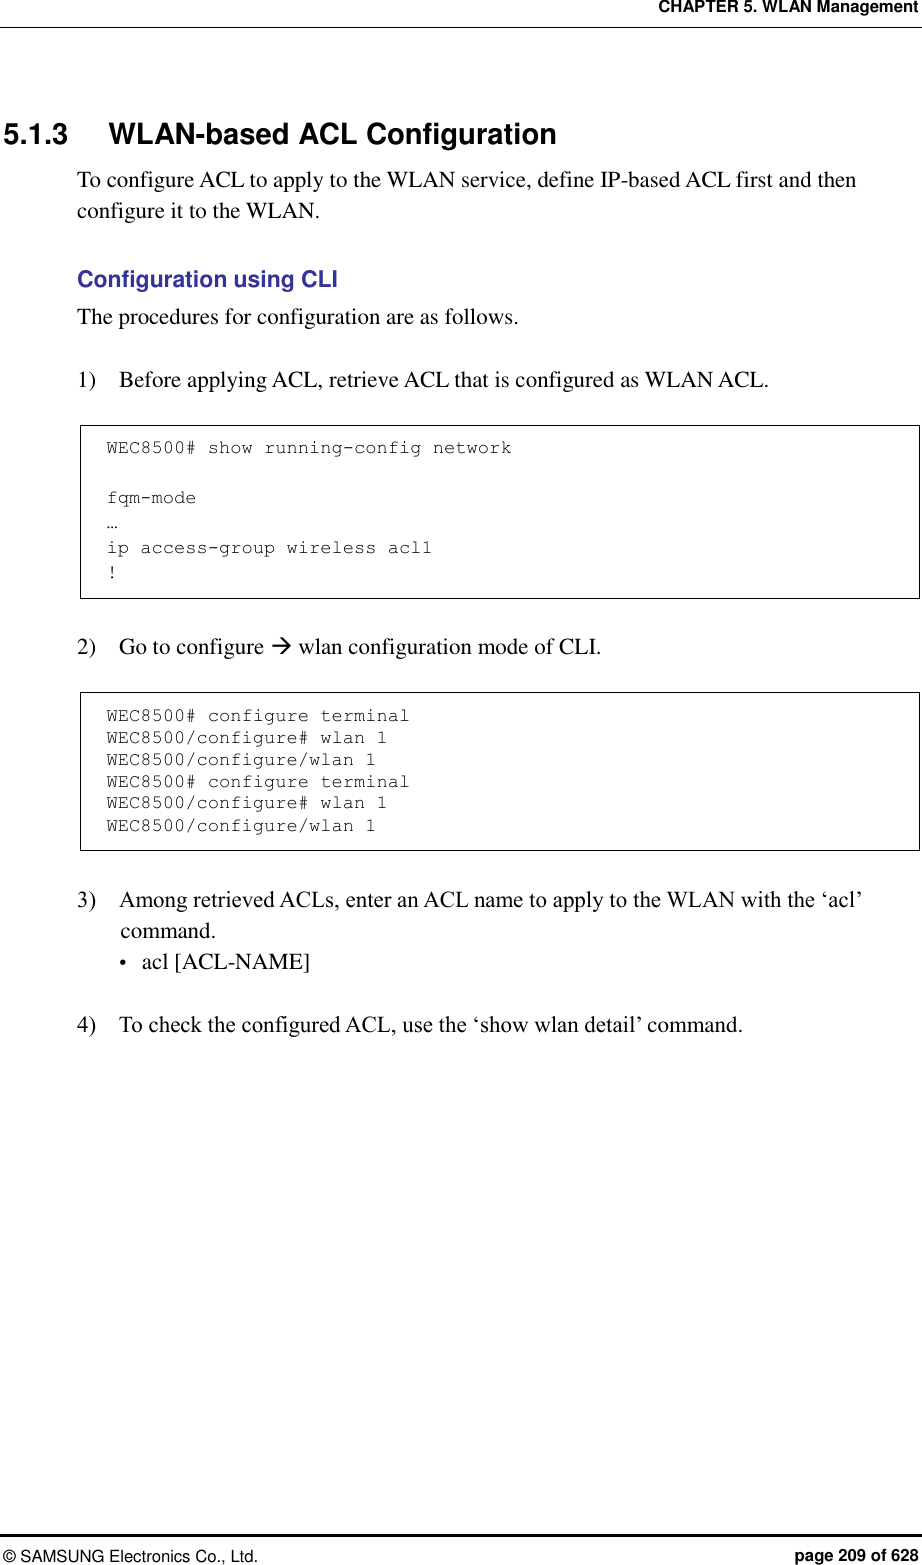 CHAPTER 5. WLAN Management ©  SAMSUNG Electronics Co., Ltd.  page 209 of 628 5.1.3  WLAN-based ACL Configuration To configure ACL to apply to the WLAN service, define IP-based ACL first and then configure it to the WLAN.    Configuration using CLI The procedures for configuration are as follows.  1)    Before applying ACL, retrieve ACL that is configured as WLAN ACL.  WEC8500# show running-config network   fqm-mode … ip access-group wireless acl1 !  2)    Go to configure  wlan configuration mode of CLI.  WEC8500# configure terminal WEC8500/configure# wlan 1  WEC8500/configure/wlan 1 WEC8500# configure terminal WEC8500/configure# wlan 1  WEC8500/configure/wlan 1  3)    Among retrieved ACLs, enter an ACL name to apply to the WLAN with the ‘acl’ command.    acl [ACL-NAME]  4)    To check the configured ACL, use the ‘show wlan detail’ command. 